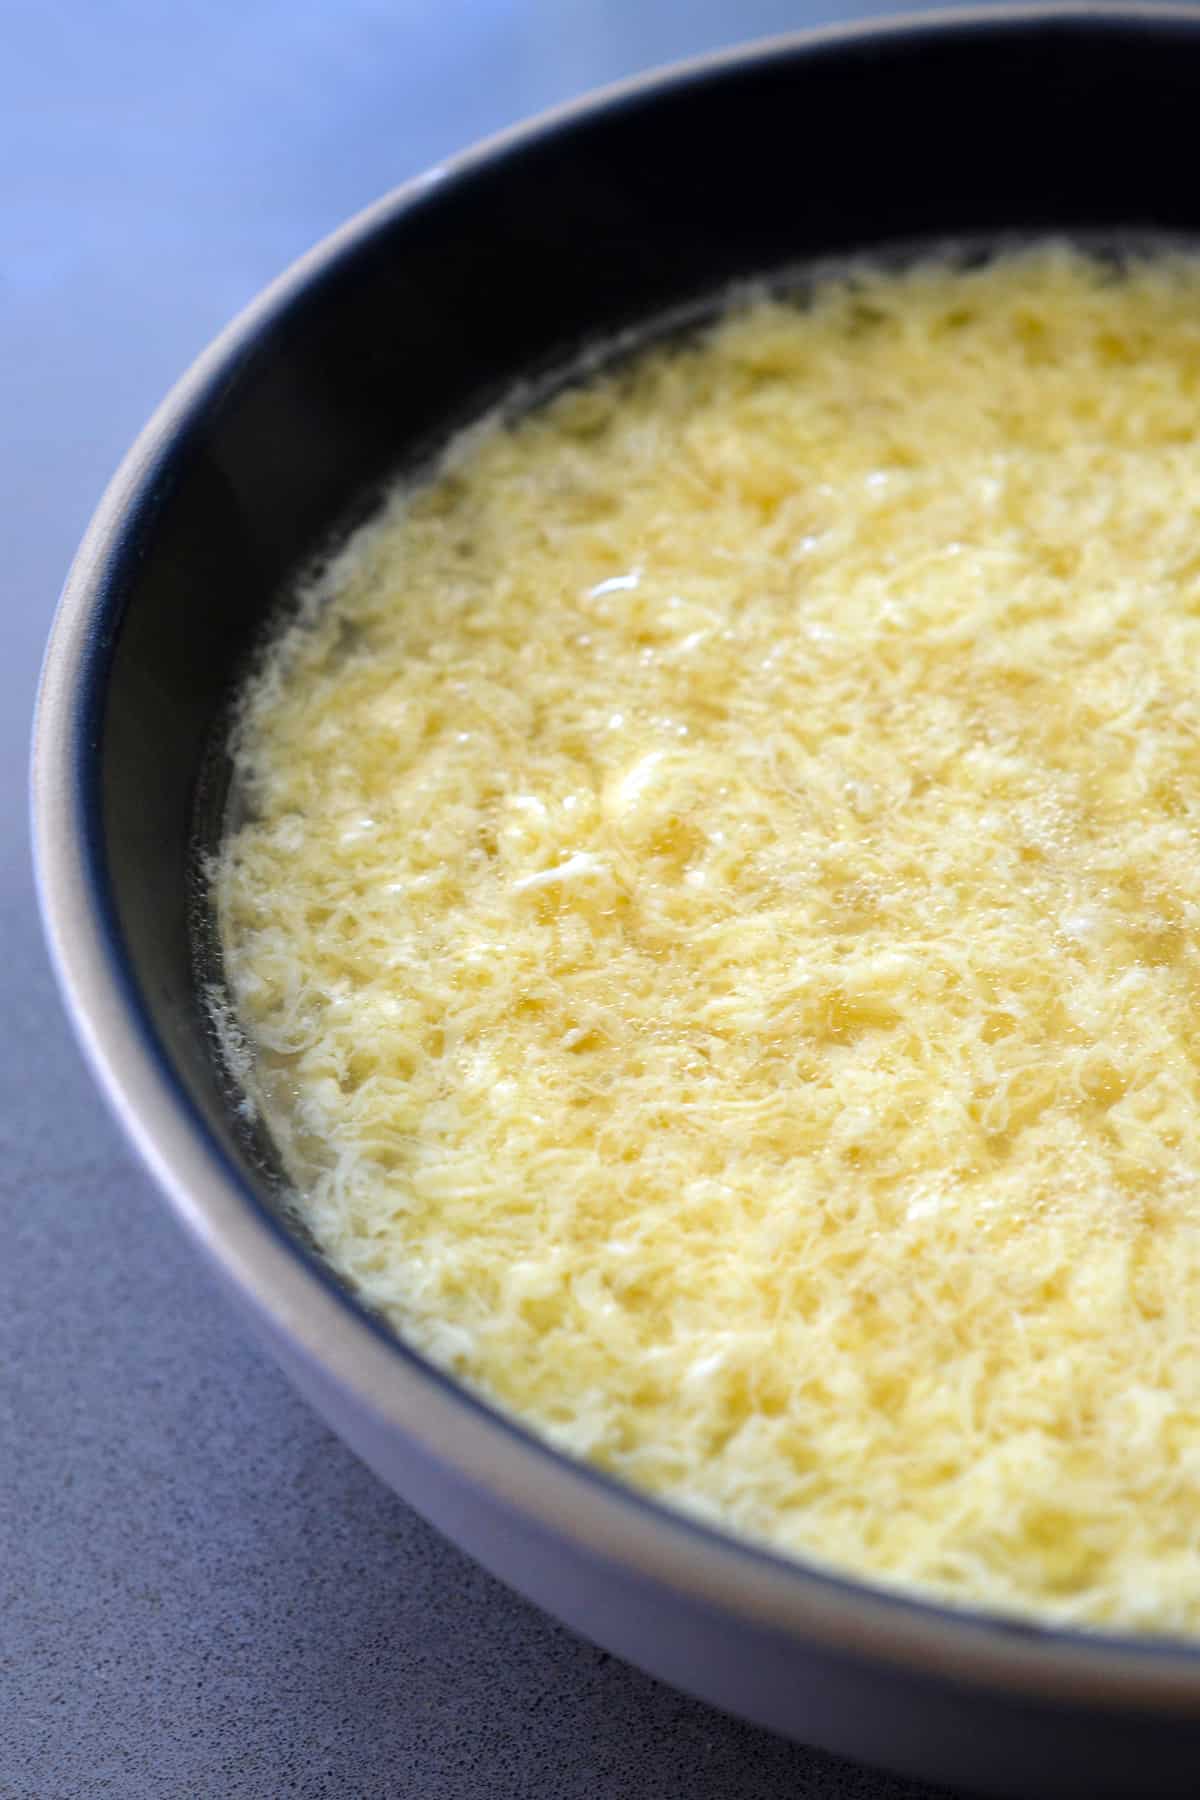 A side view of simple egg drop soup in a bowl with no garnishes.